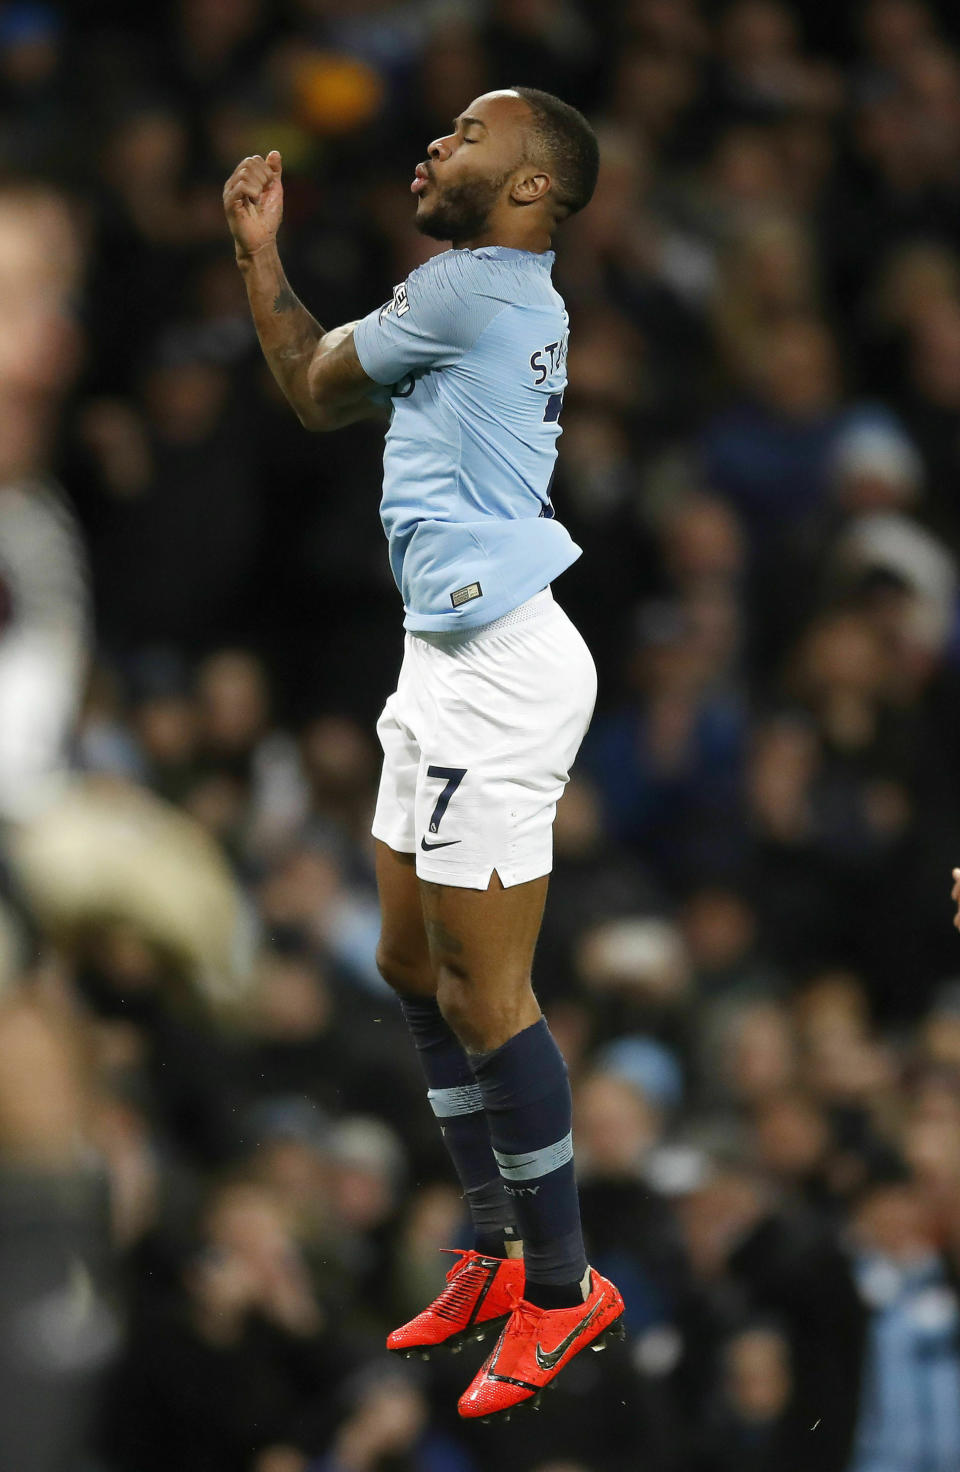 Manchester City's Raheem Sterling celebrates scoring during the English Premier League soccer match between Manchester City and Watford at the Etihad Stadium, Manchester, England, Saturday March 9, 2019. (Martin Rickett/PA via AP)